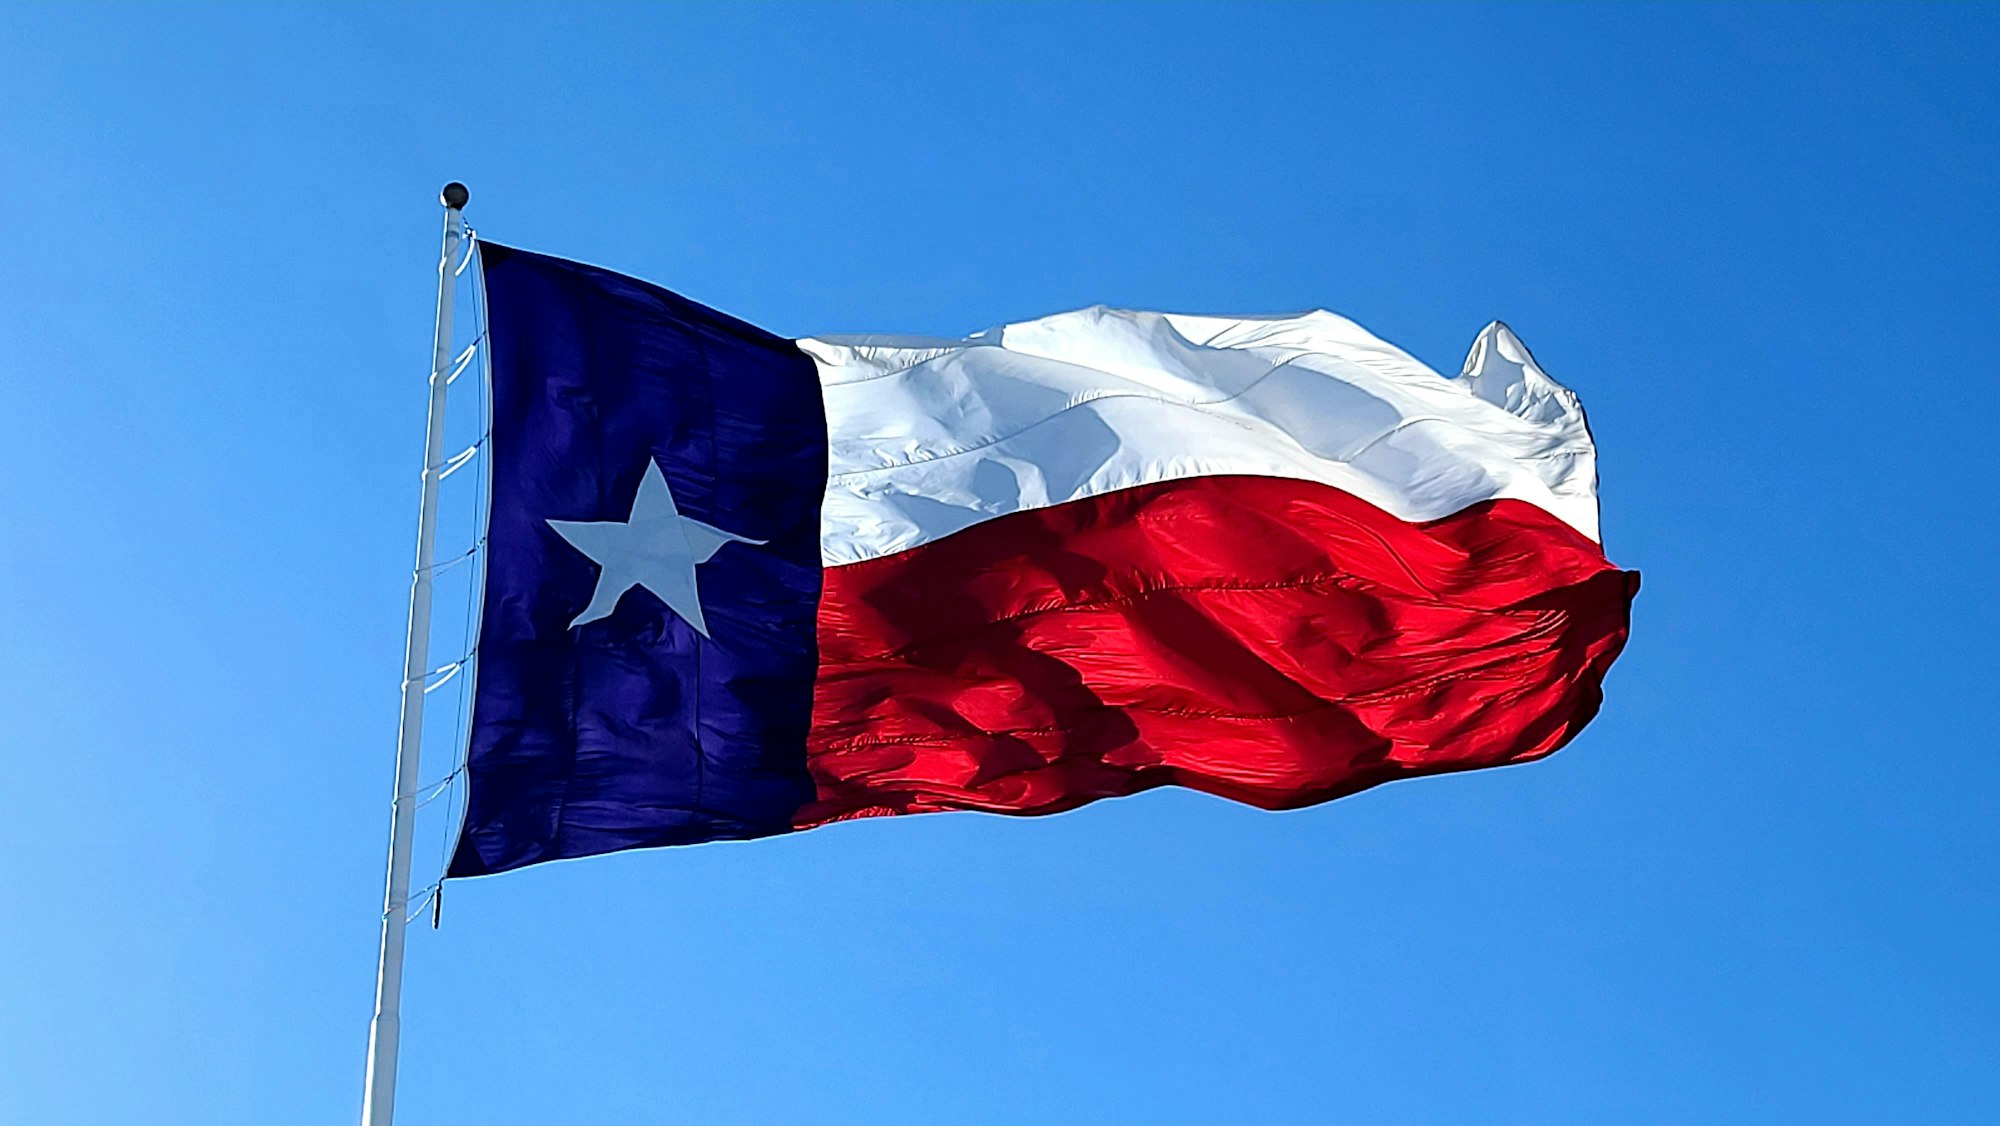 How Many Nations Have Flown Their Flags Over Texas?